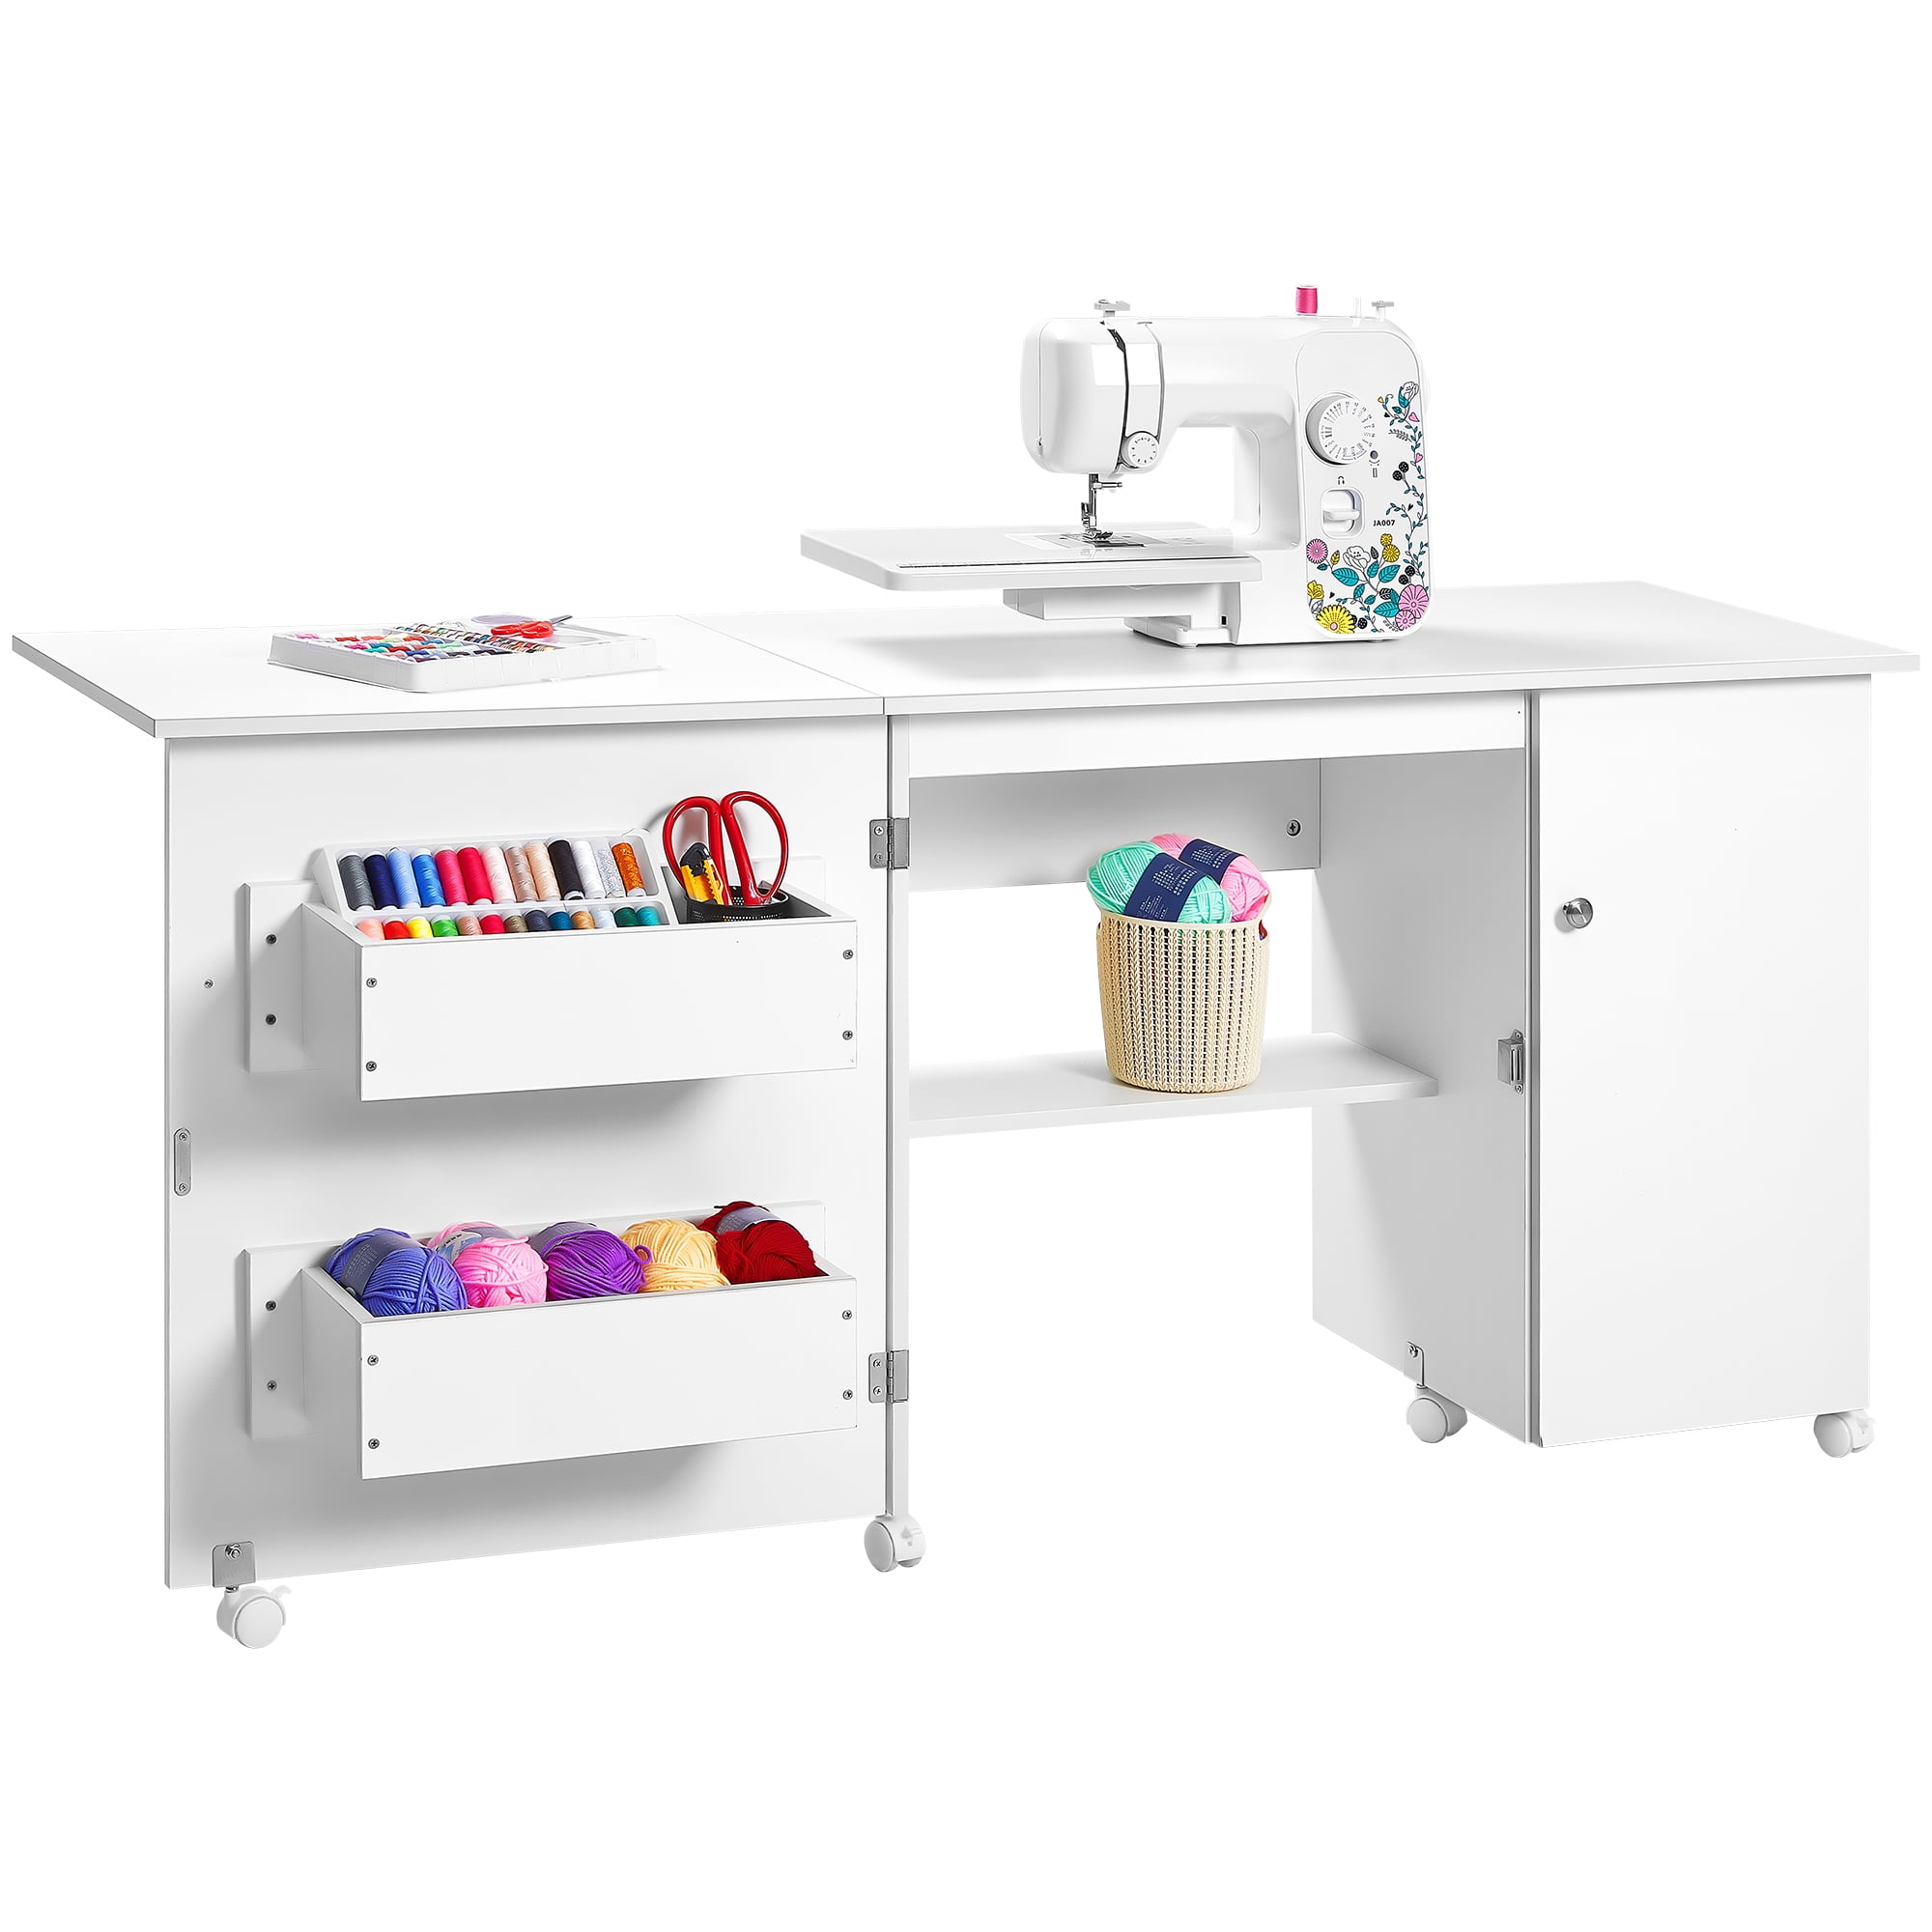 Folding Sewing Craft Table,Sewing Machine Craft Table with Storage Shelves,3 Storage Lattice and Lockable Casters,Compact Modern Style Design White 